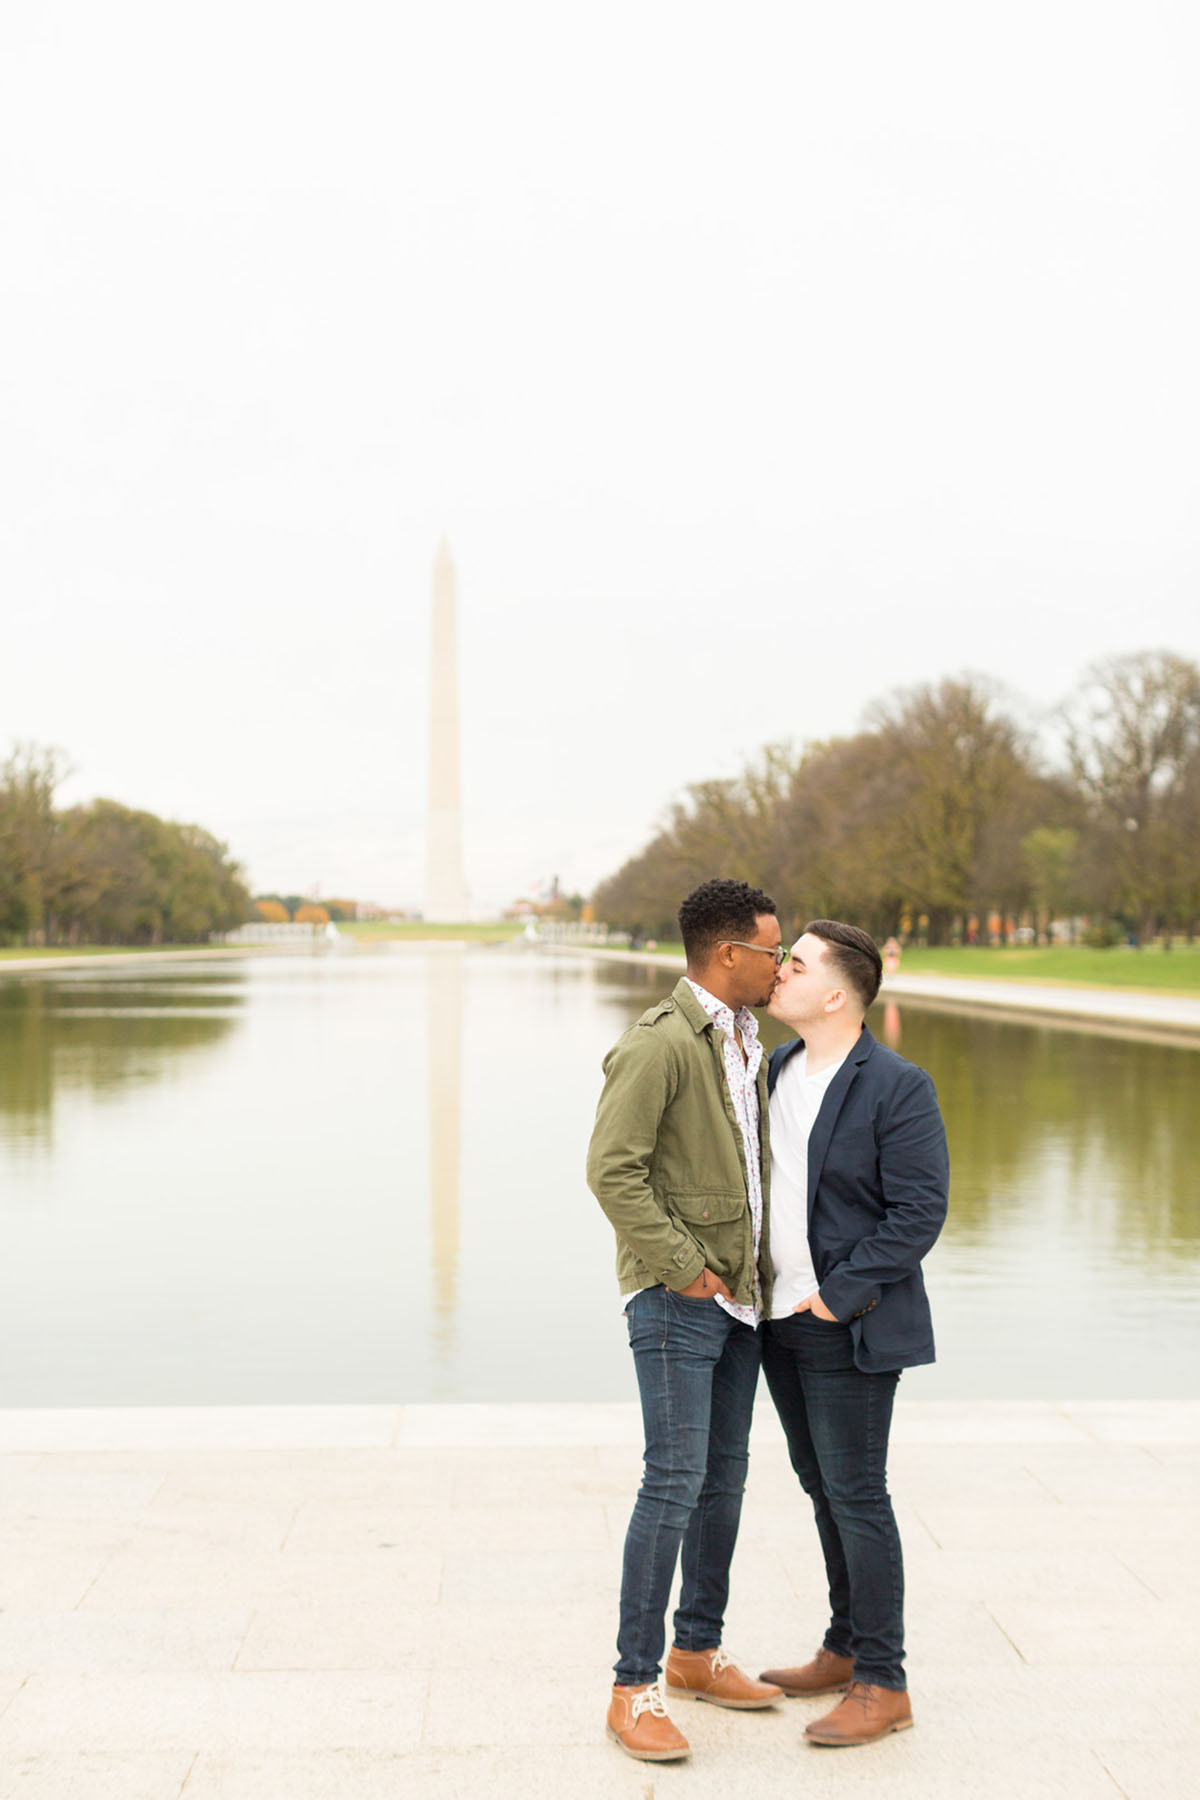 Fall engagement photos around landmarks in Washington, D.C. gay engagement two grooms J Crew Lincoln Memorial Jefferson Memorial National Mall